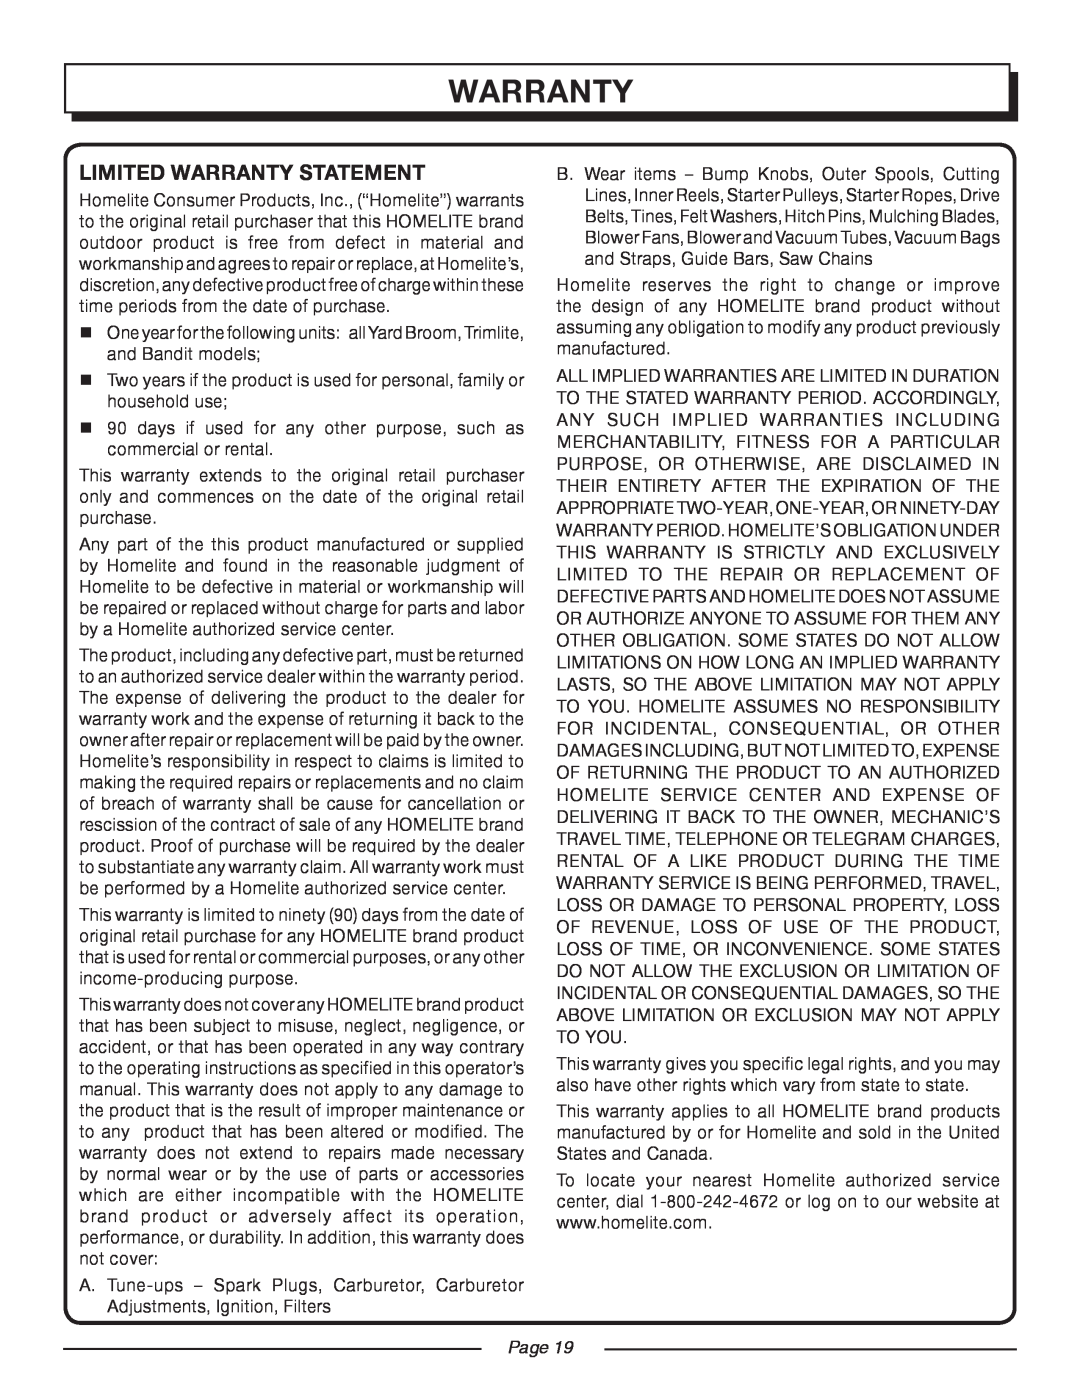 Homelite UT08947 manual Limited Warranty Statement, Page 